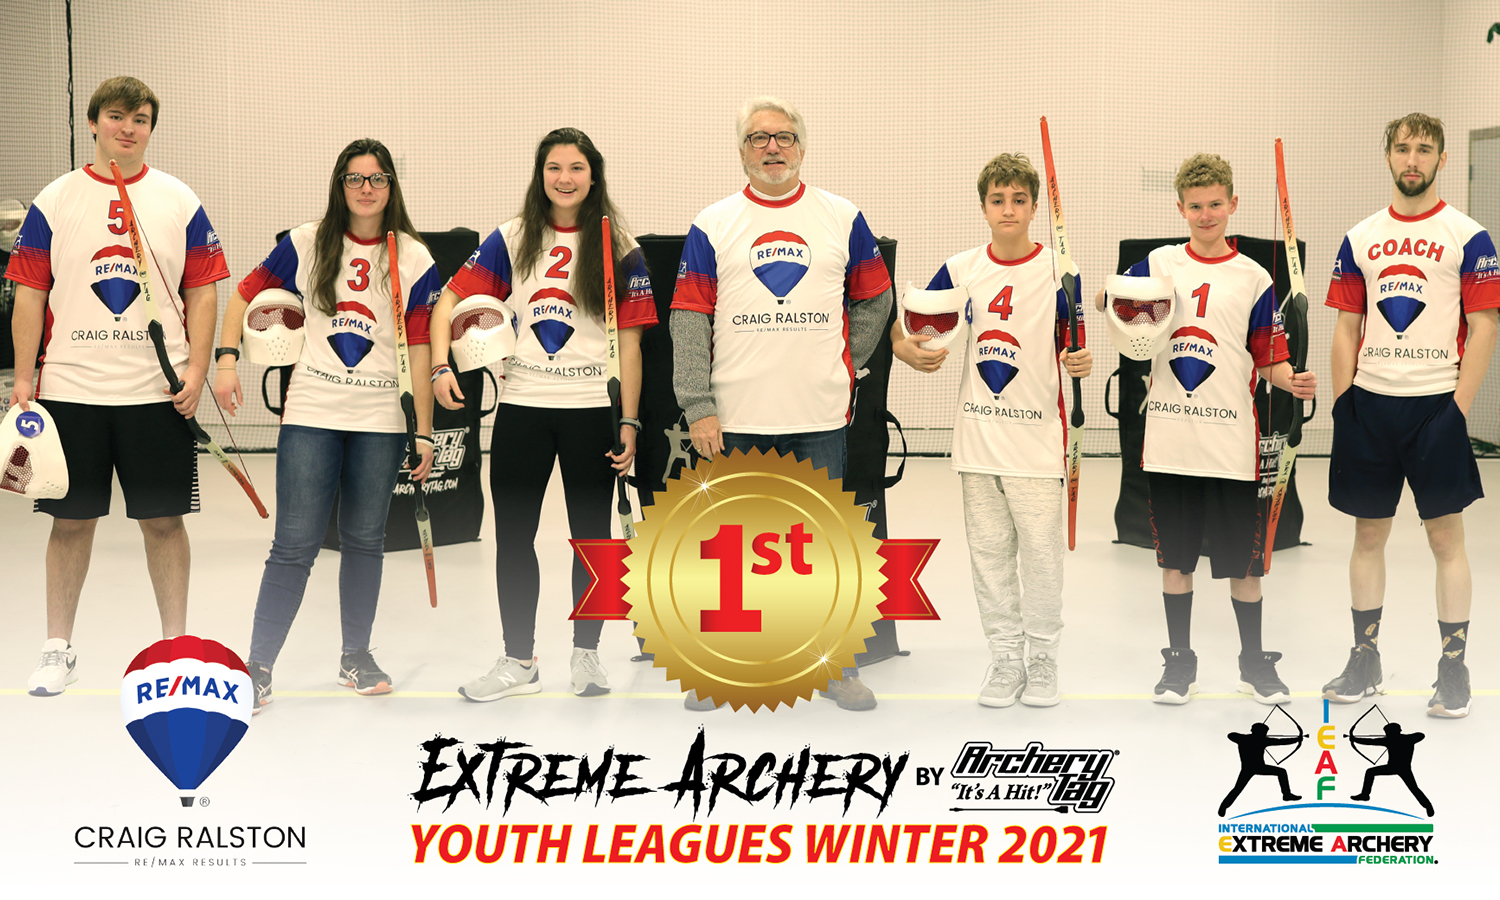 album_photos/2561_YouthLeague-Winter 2021_0000_YouthLeague-FallWinter2021-REMAX-Team-6x4-Photo-1st-01.jpg